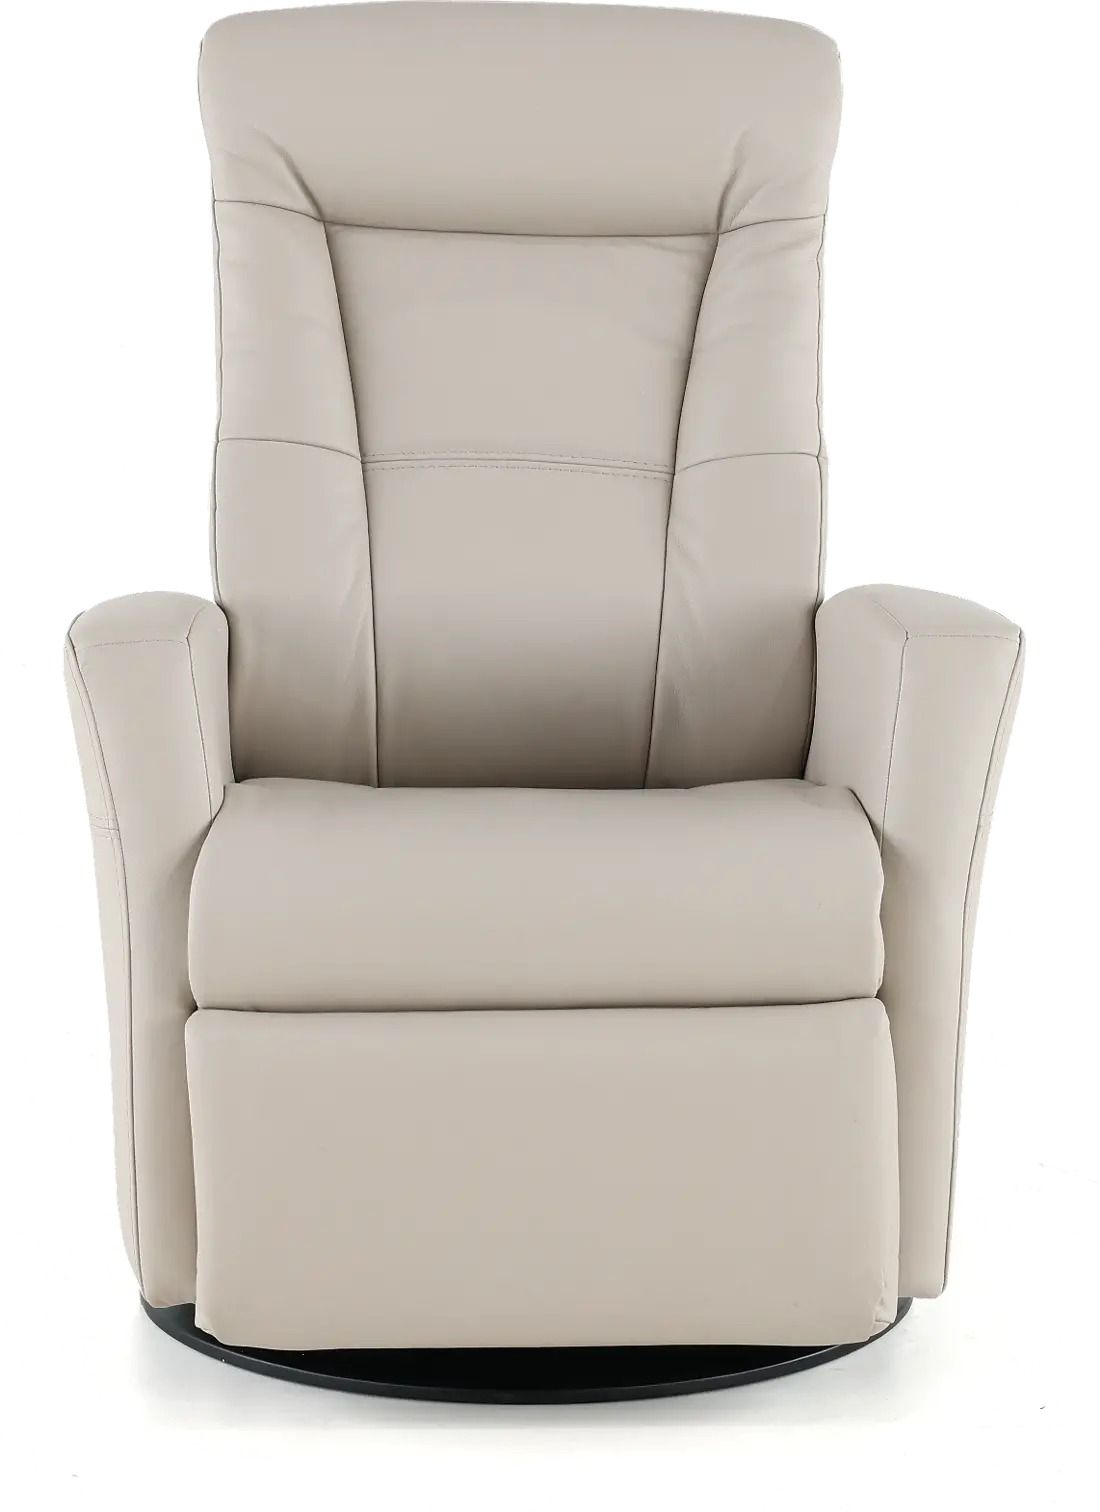 The Ultimate Comfort: Why You Need an Adjustable Glider Recliner in Your Living Room